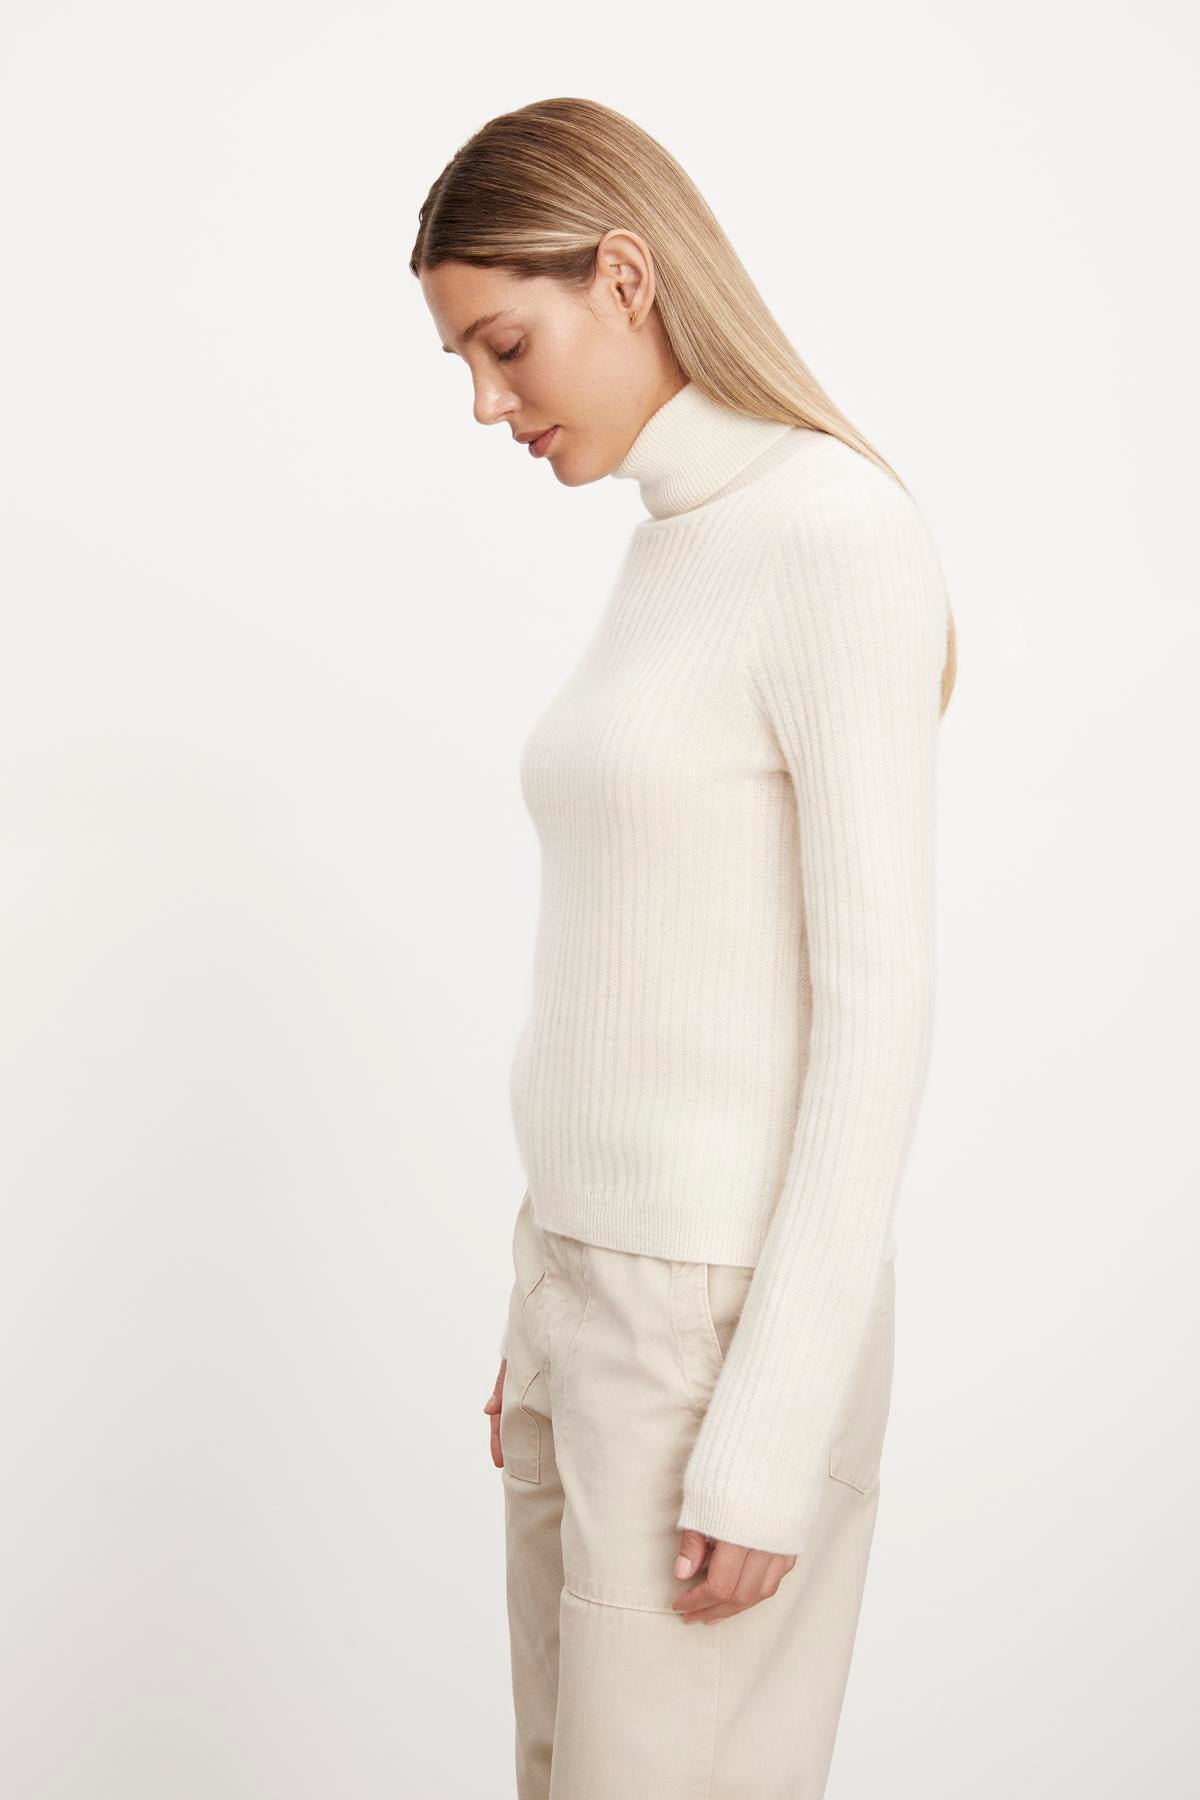 The model is wearing a white LORI CASHMERE TURTLENECK SWEATER by Velvet by Graham & Spencer and beige pants.-35727549169857